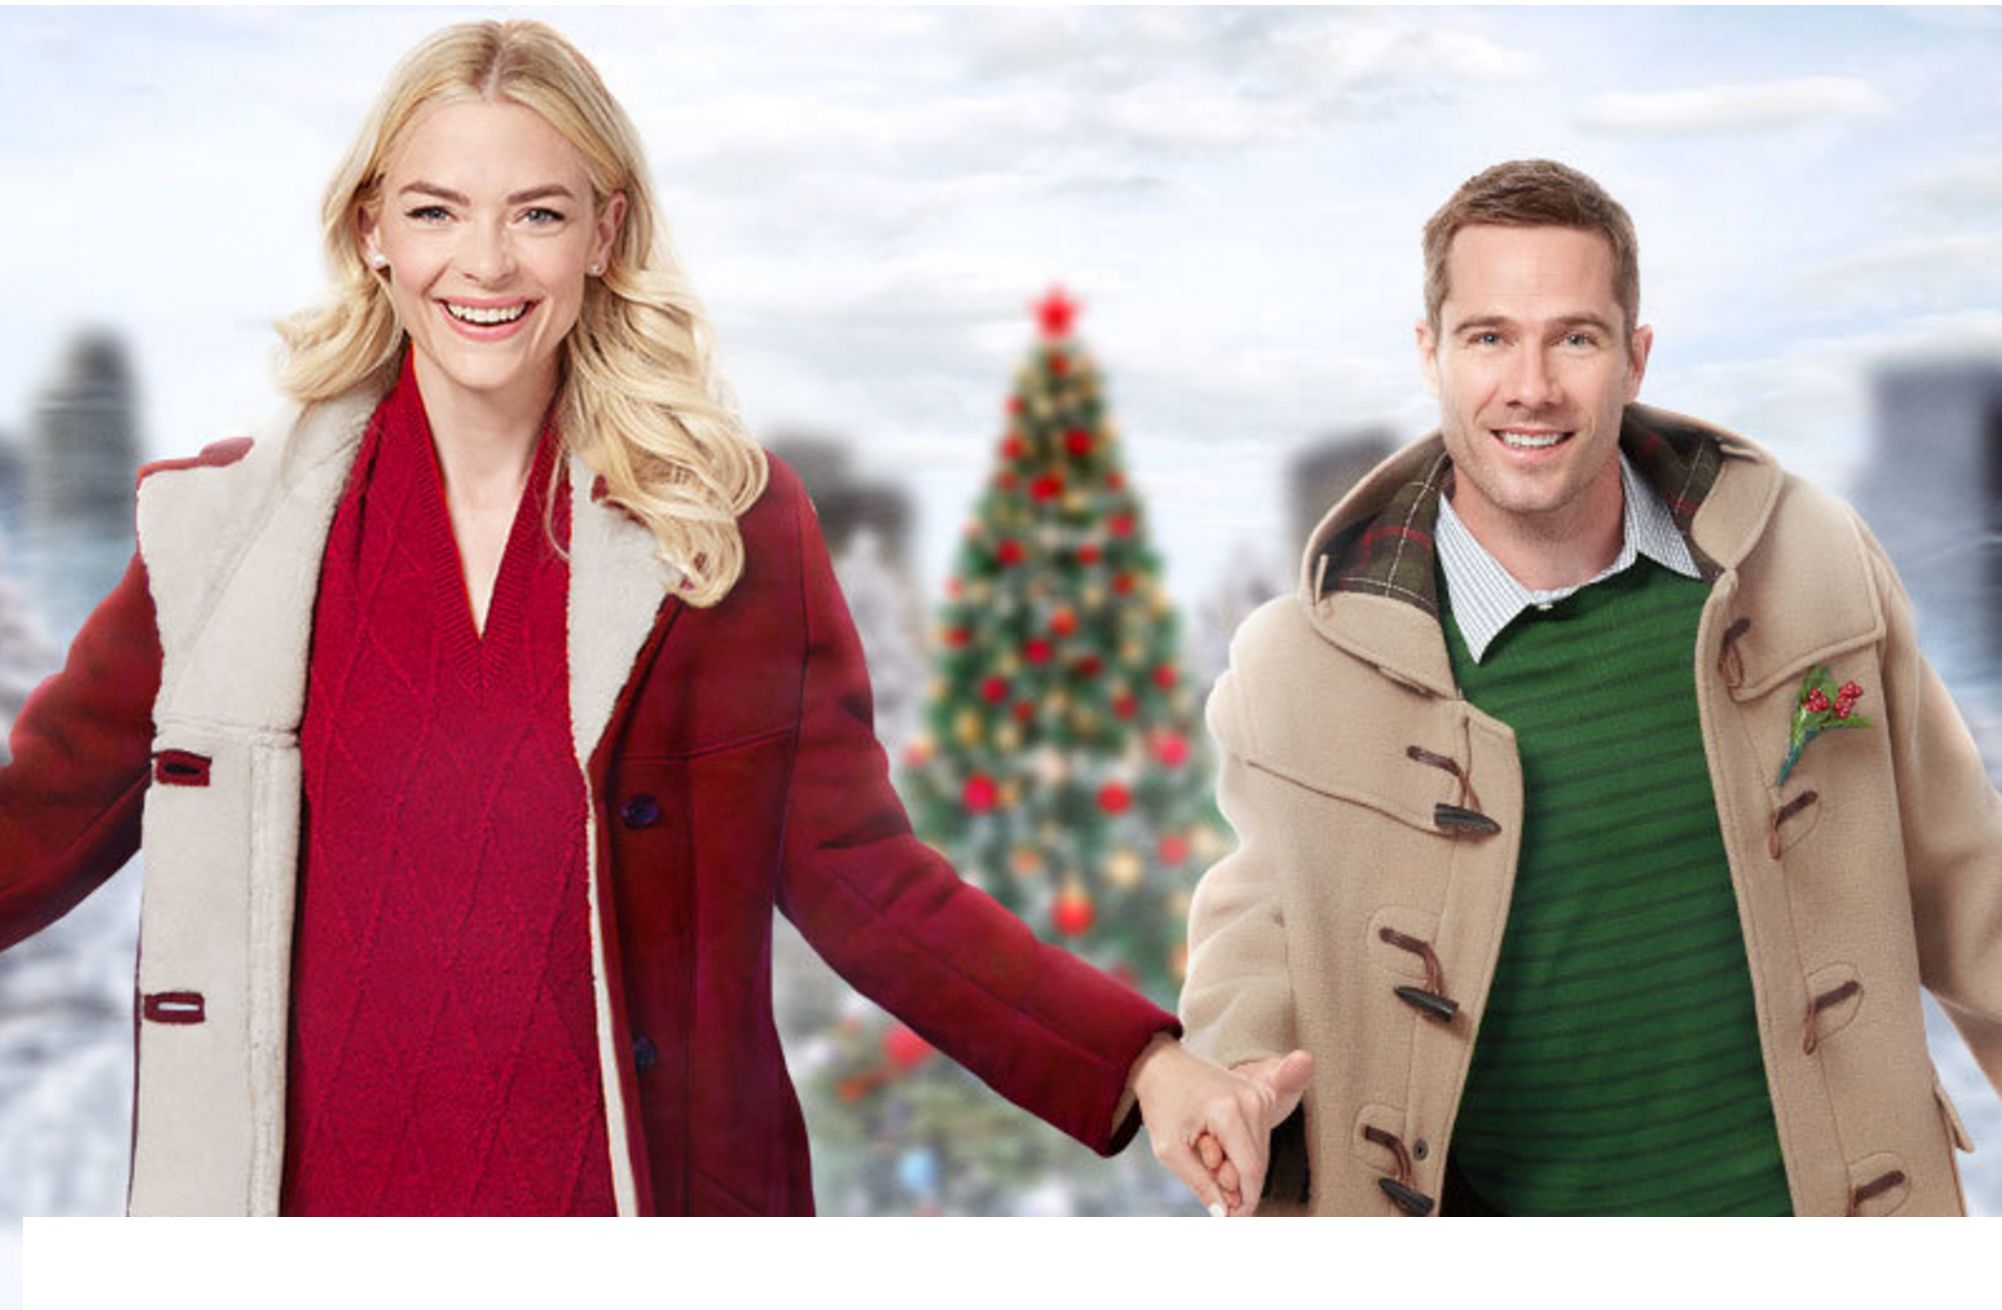 The Hallmark Christmas Movie Party Game You've Been Waiting For.